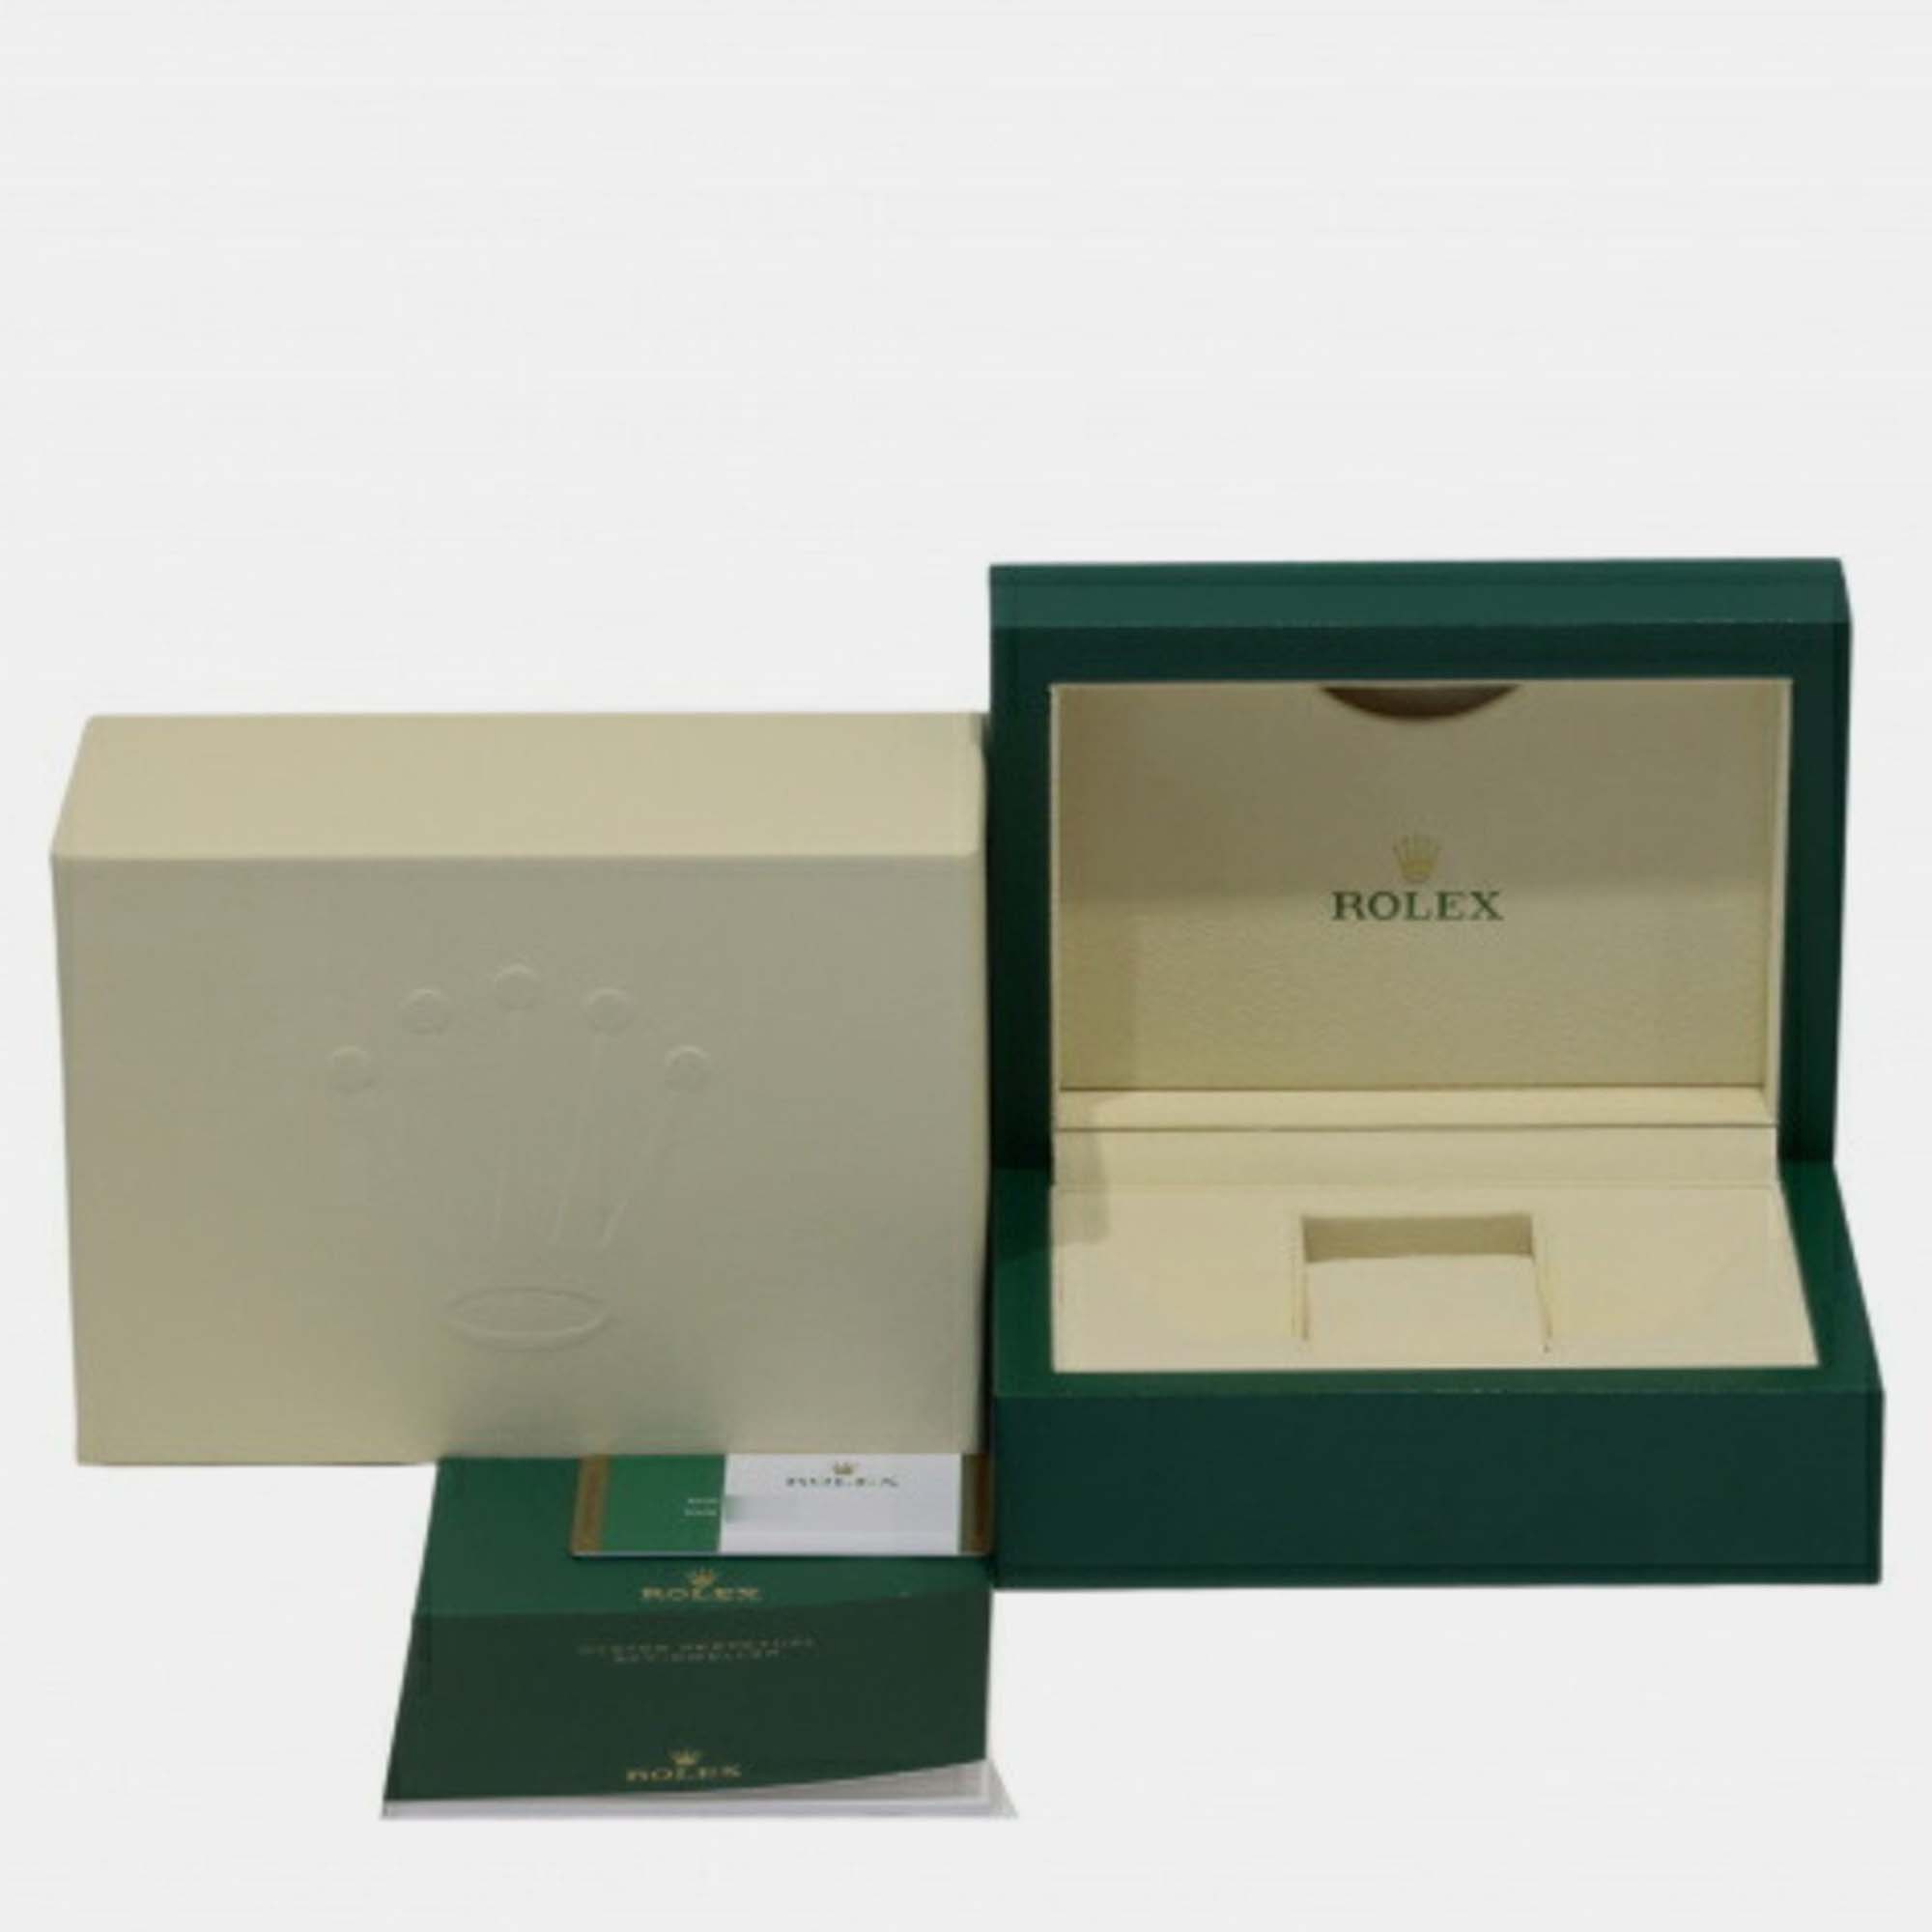 Rolex White 18k White Gold And Stainless Steel Sky-Dweller 326934 Automatic Men's Wristwatch 42 Mm